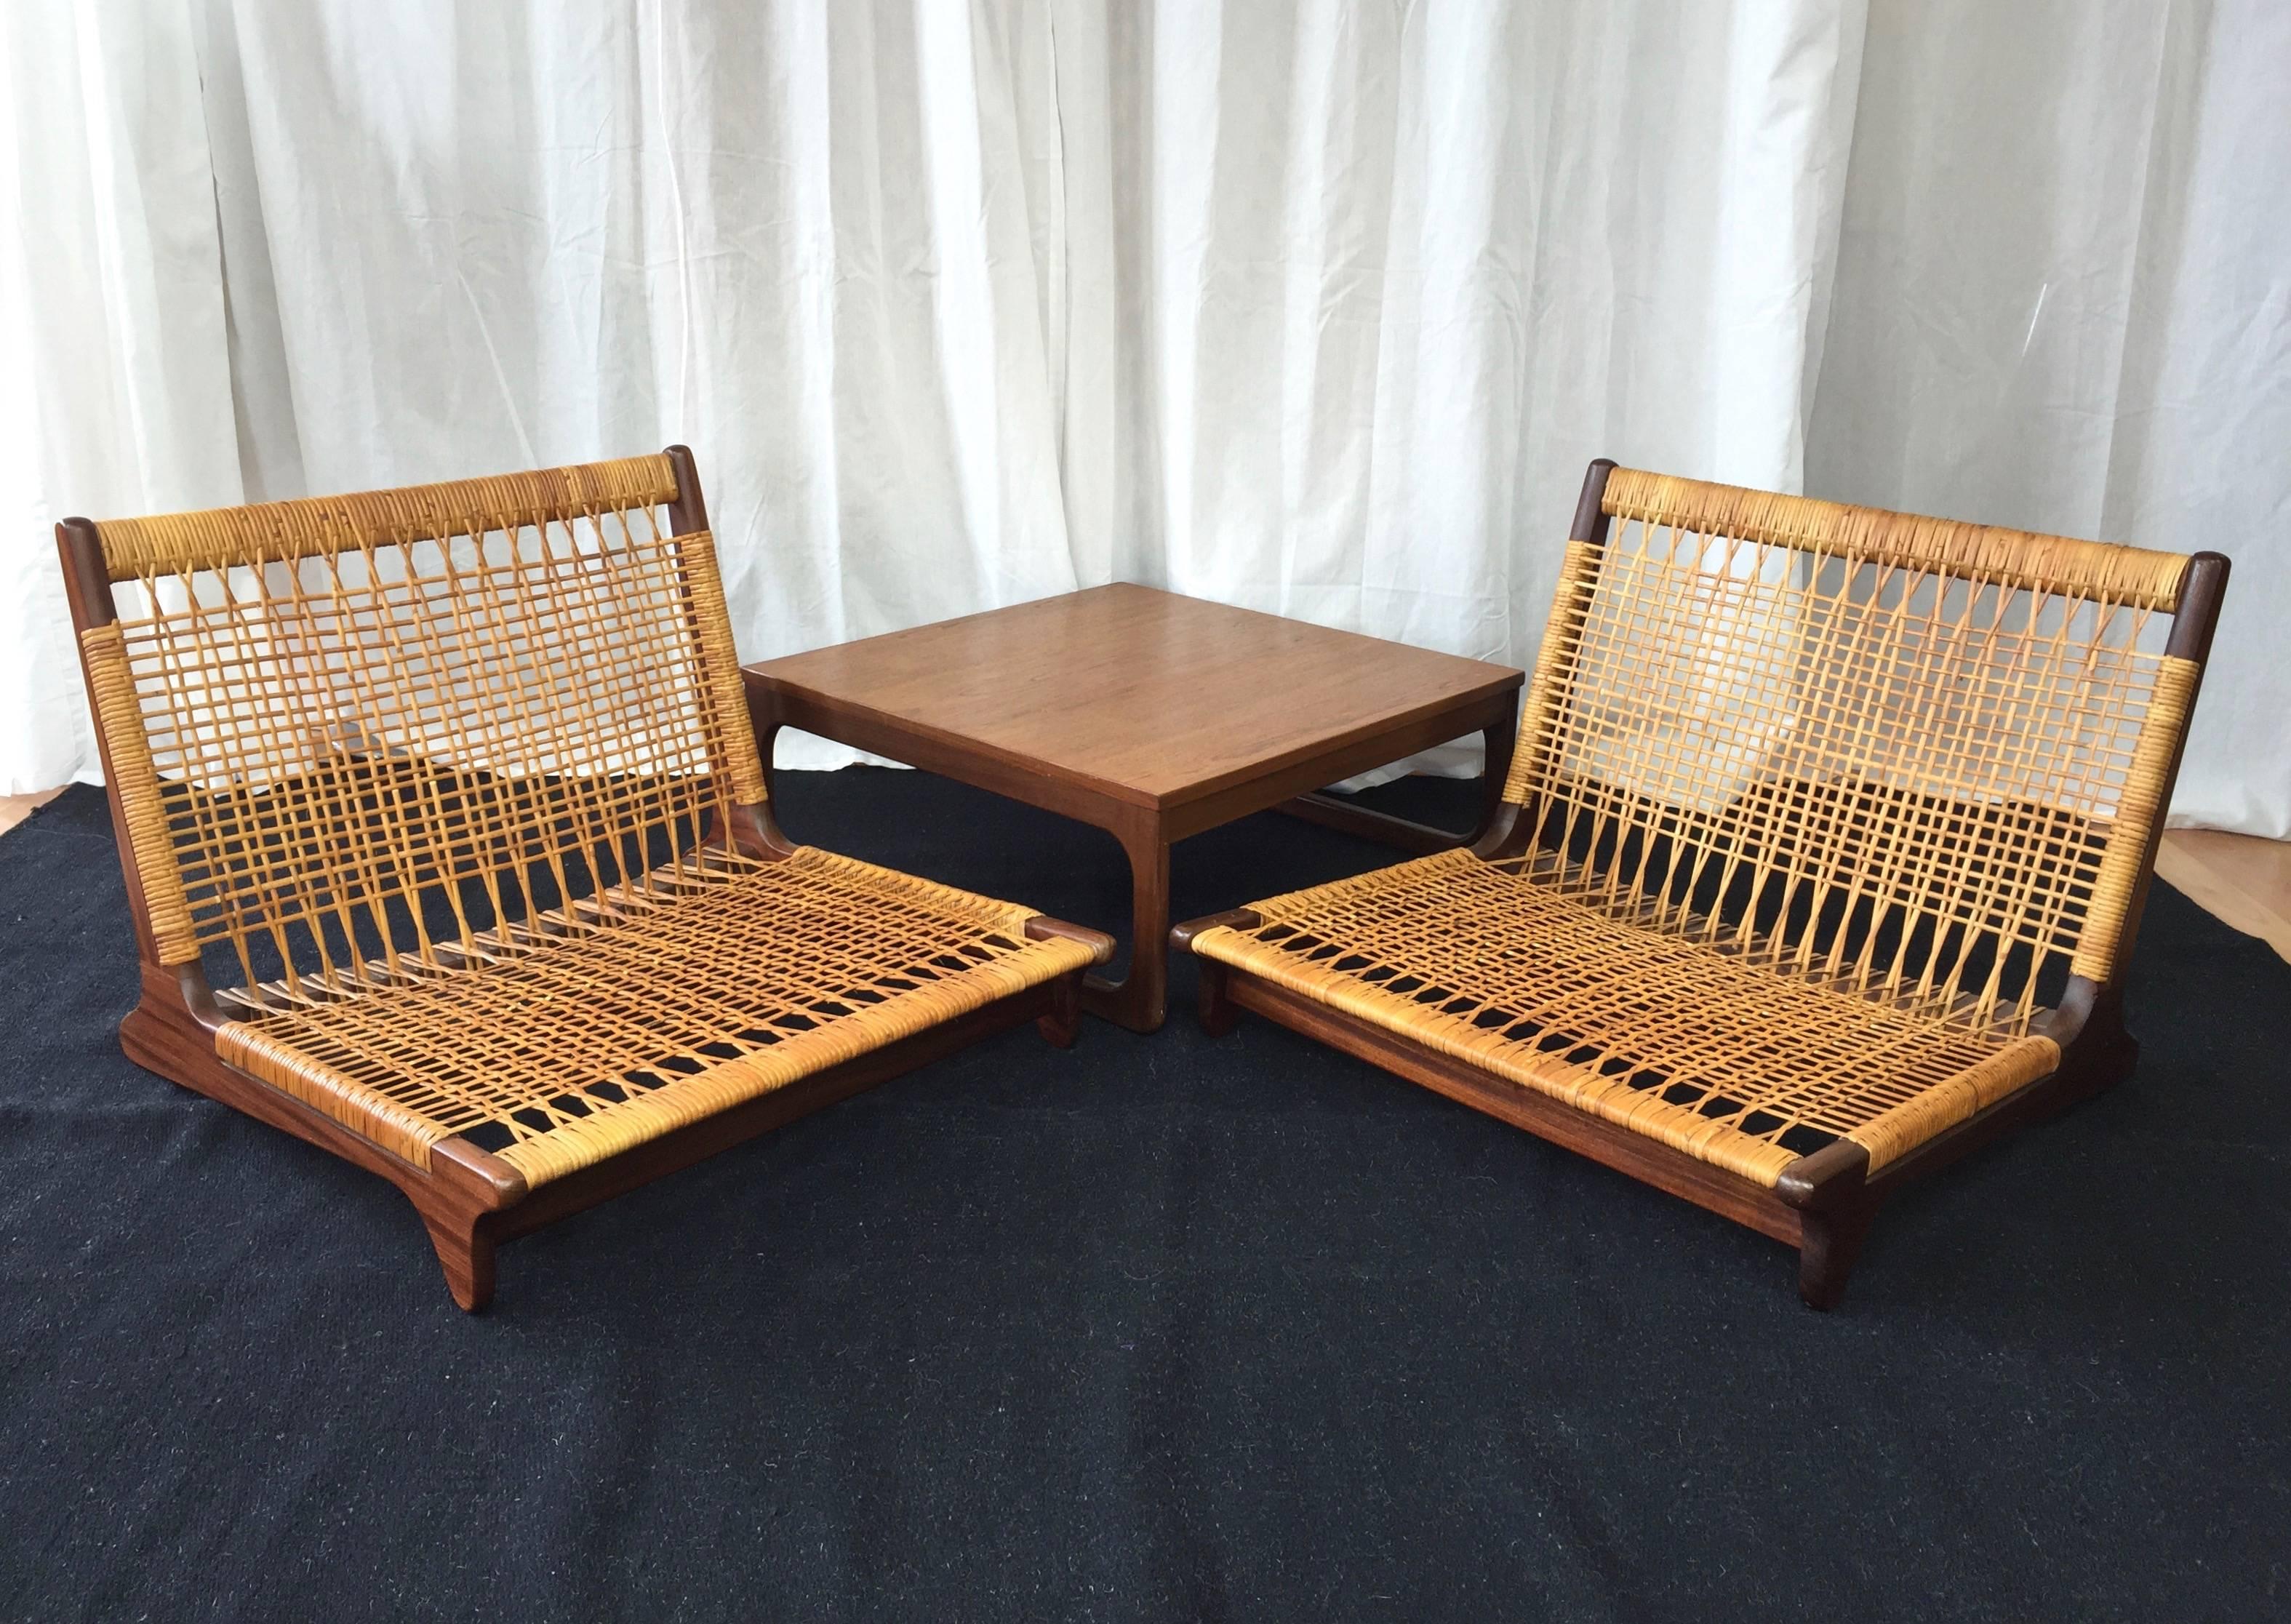 A scene-stealing low lounge chair and table set designed by Hans Olsen for Brahmin.

Pair of stained teak frame ultra-low loungers feature woven cane seats in great original condition. Accompanied by a matching top low side table with stained teak